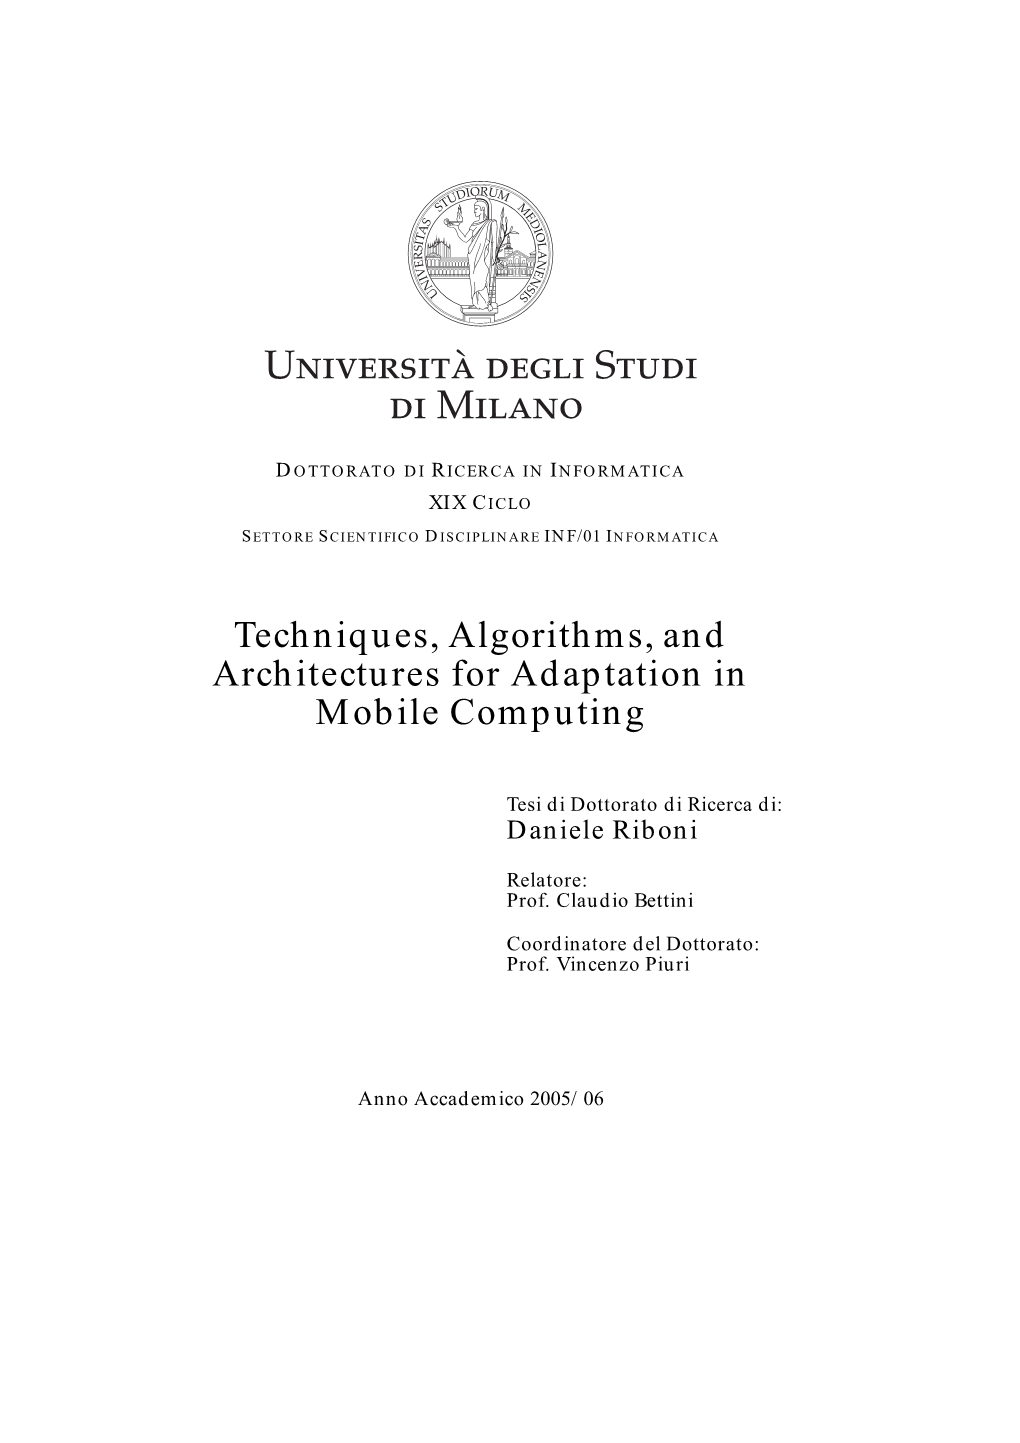 Techniques, Algorithms, and Architectures for Adaptation in Mobile Computing